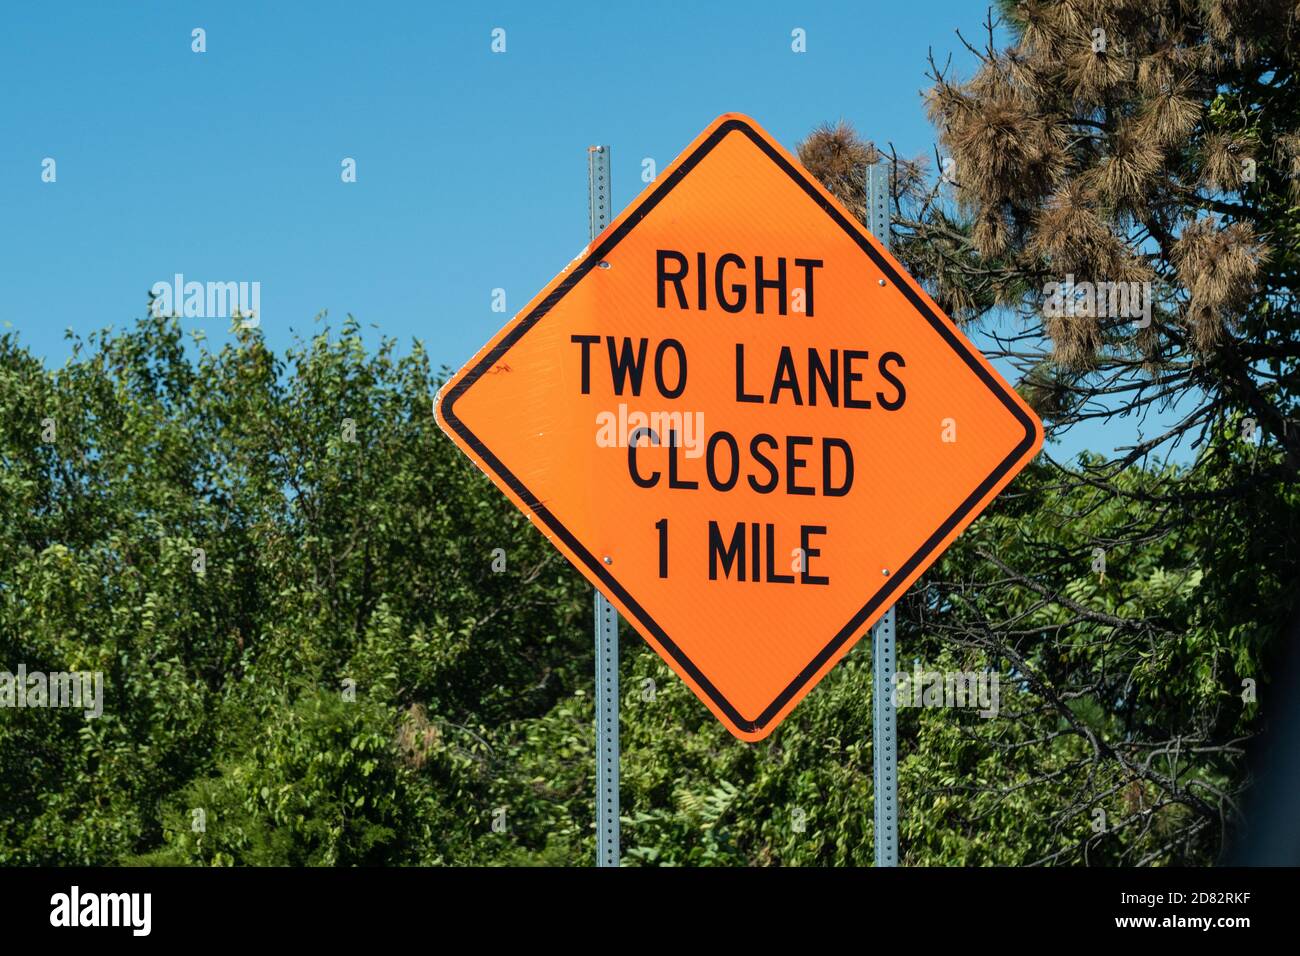 Bright orange Diamond shape sign ways "right two lanes closed 1 mile" on  metal post with Stock Photo - Alamy